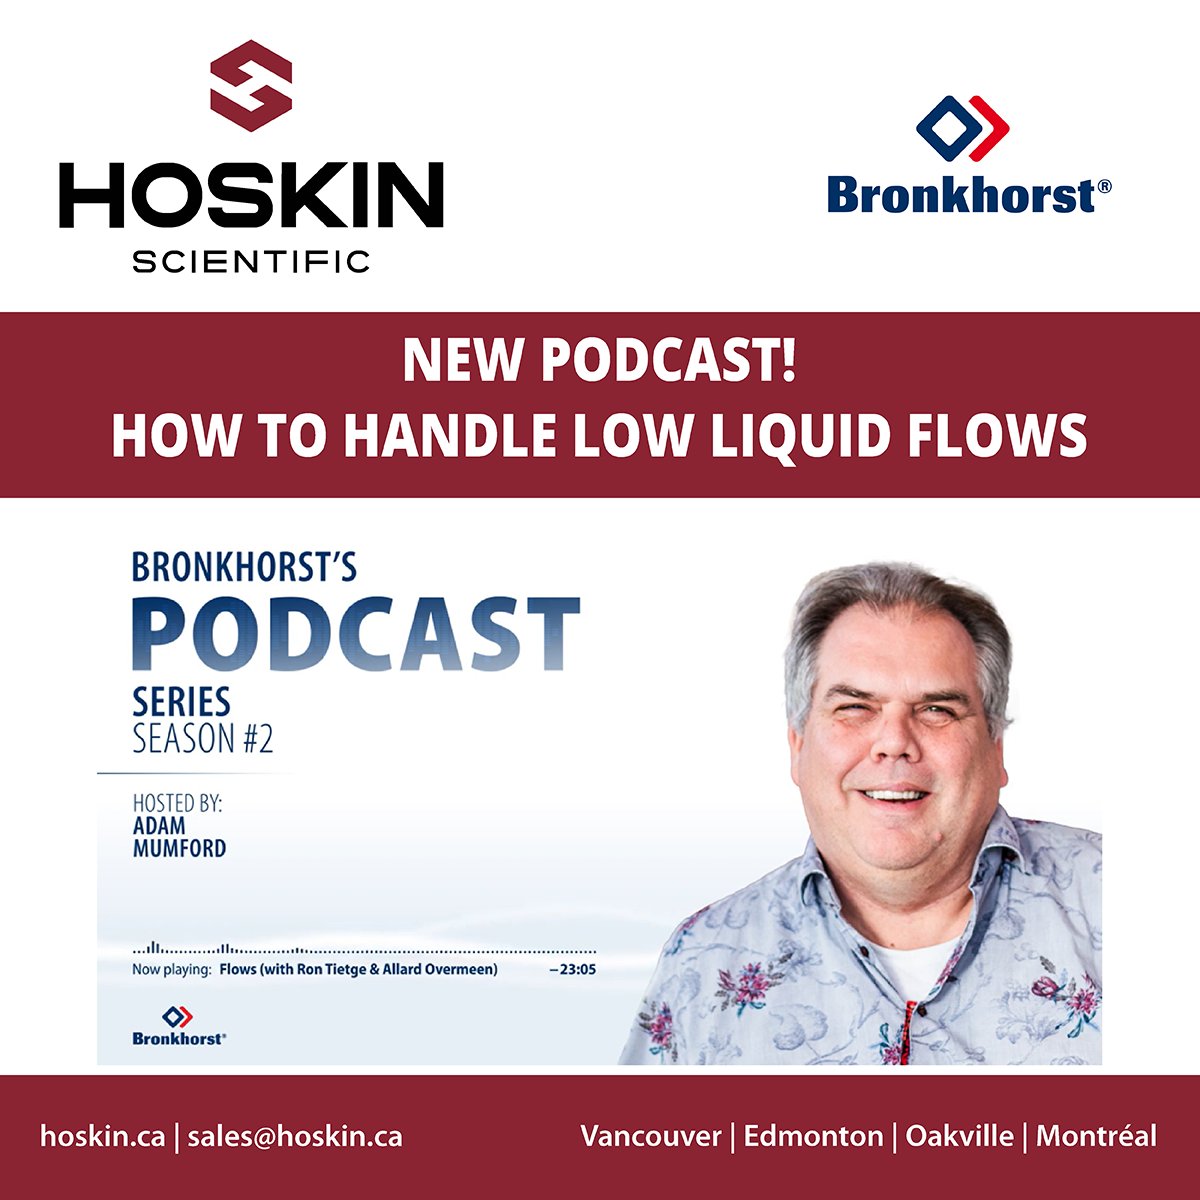 We are excited to share our latest episode on “How to Handle Low Liquid Flows” hosted by Adam. This episode features our experts, Allard, and Ron, who bring a combined experience of 68 years in the field! 

ow.ly/vbxZ50Rna94
#bronkhorst #lowflow #flowmeasurement #podcast